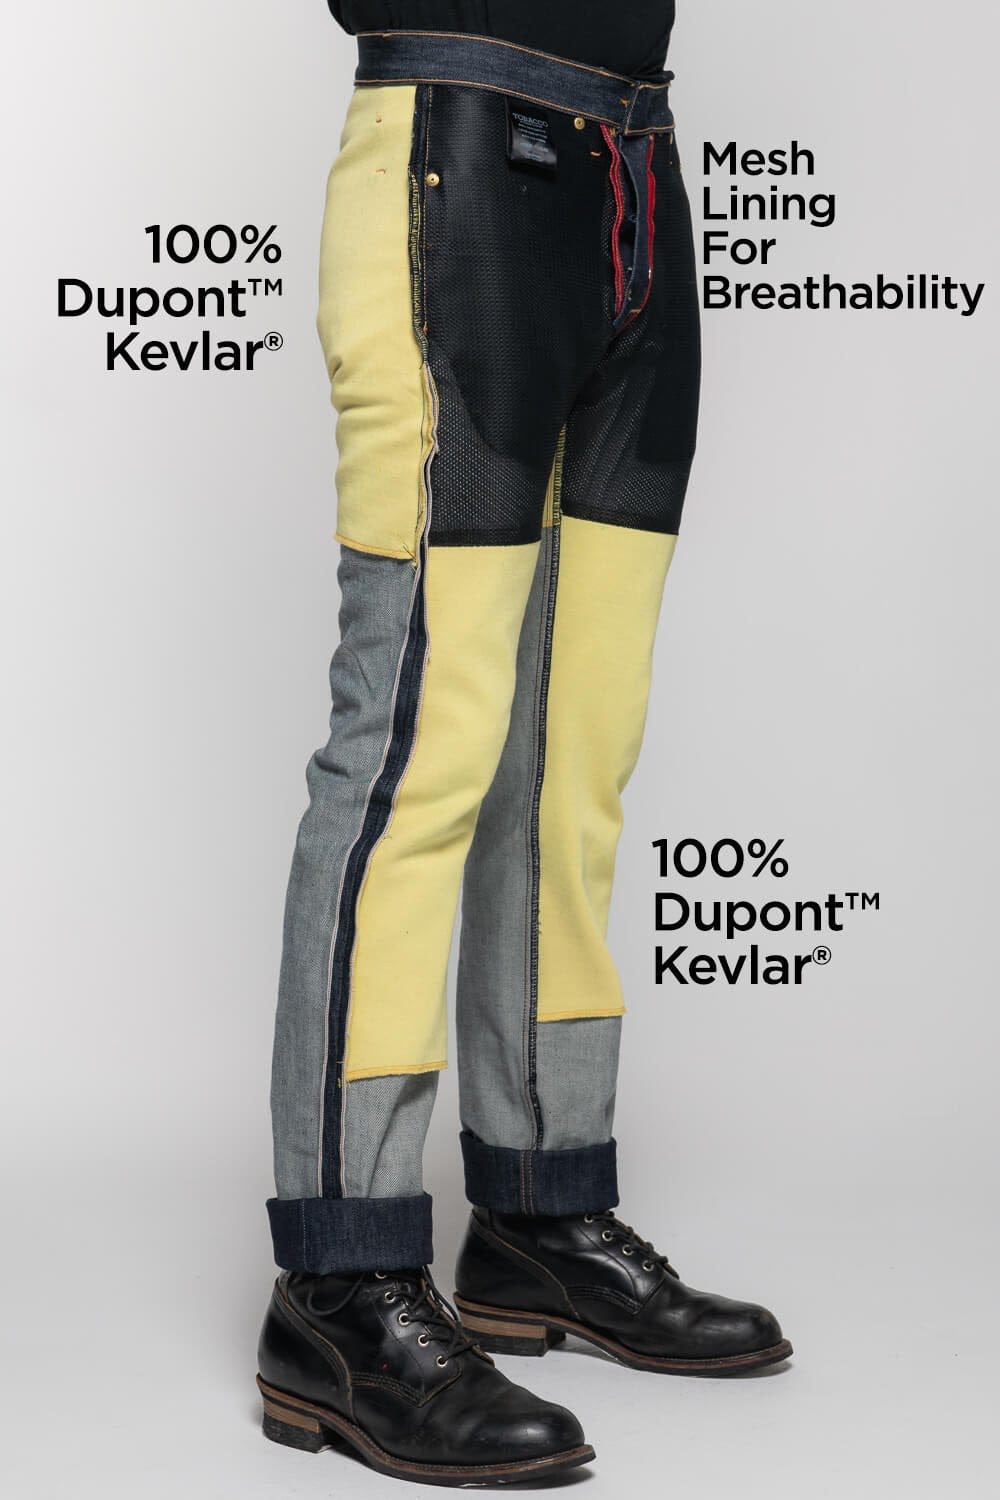 Riot Skinny Fit Protective Riding Jeans. Feat. Protective DuPont™ Kevlar®  Lining. Jet Black Prewashed Denim has 2% Stretch. Made Proudly in the USA.  - Tobacco Motorwear